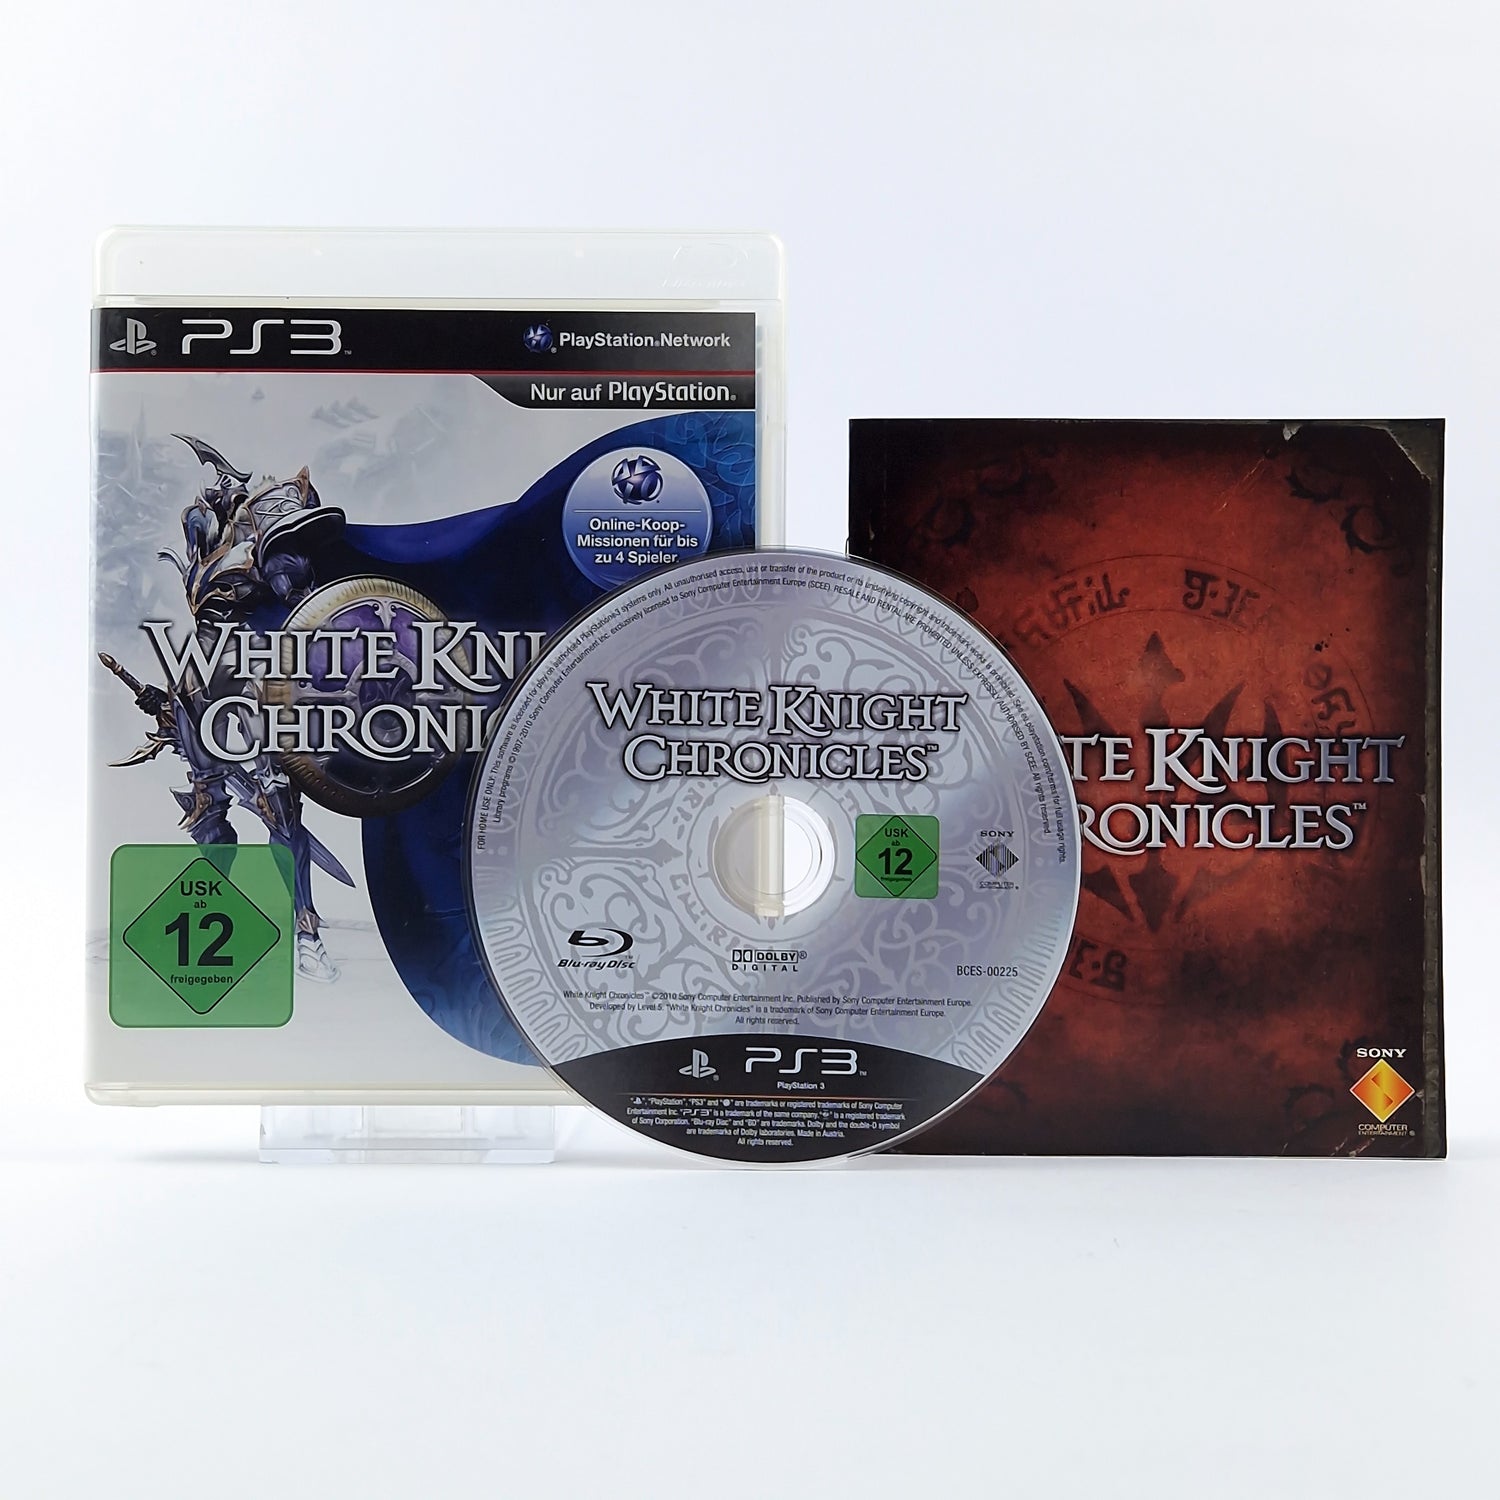 Sony Playstation 3 game: White Knight Chronicles - OVP manual PAL PS3